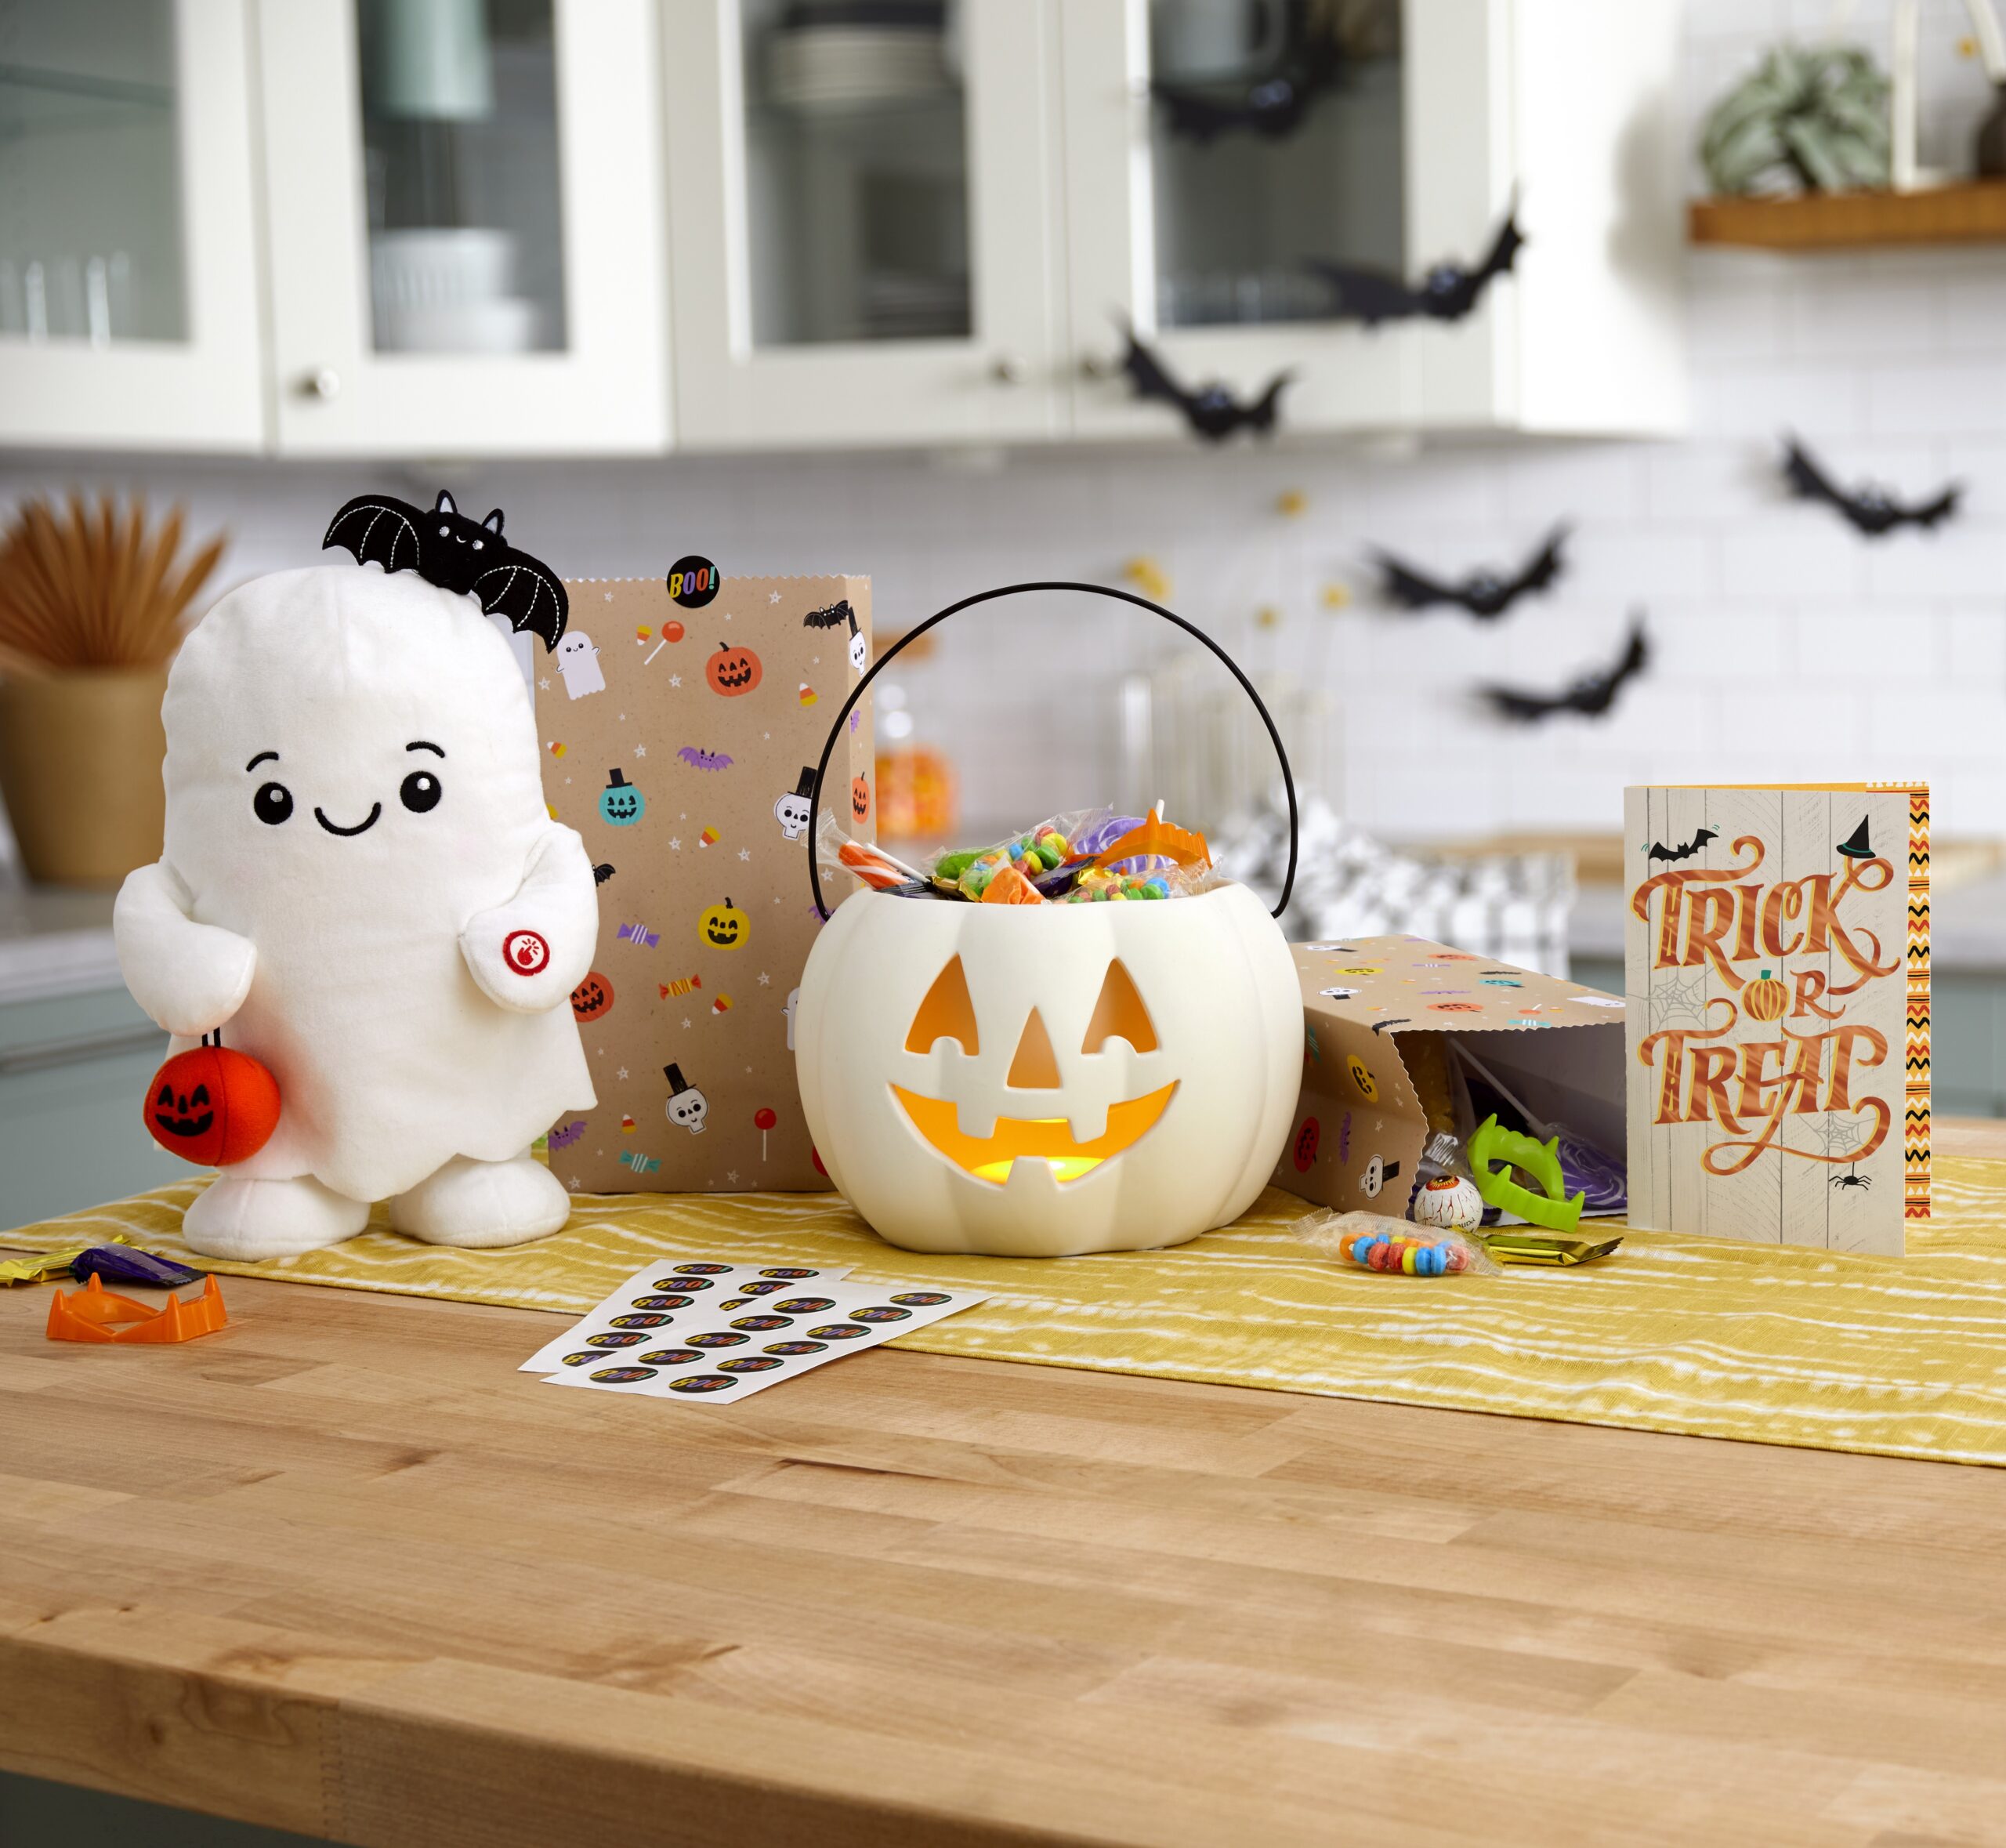 Hallmark Launches Festive Decor, Greeting Cards and Gifts for Fall ...